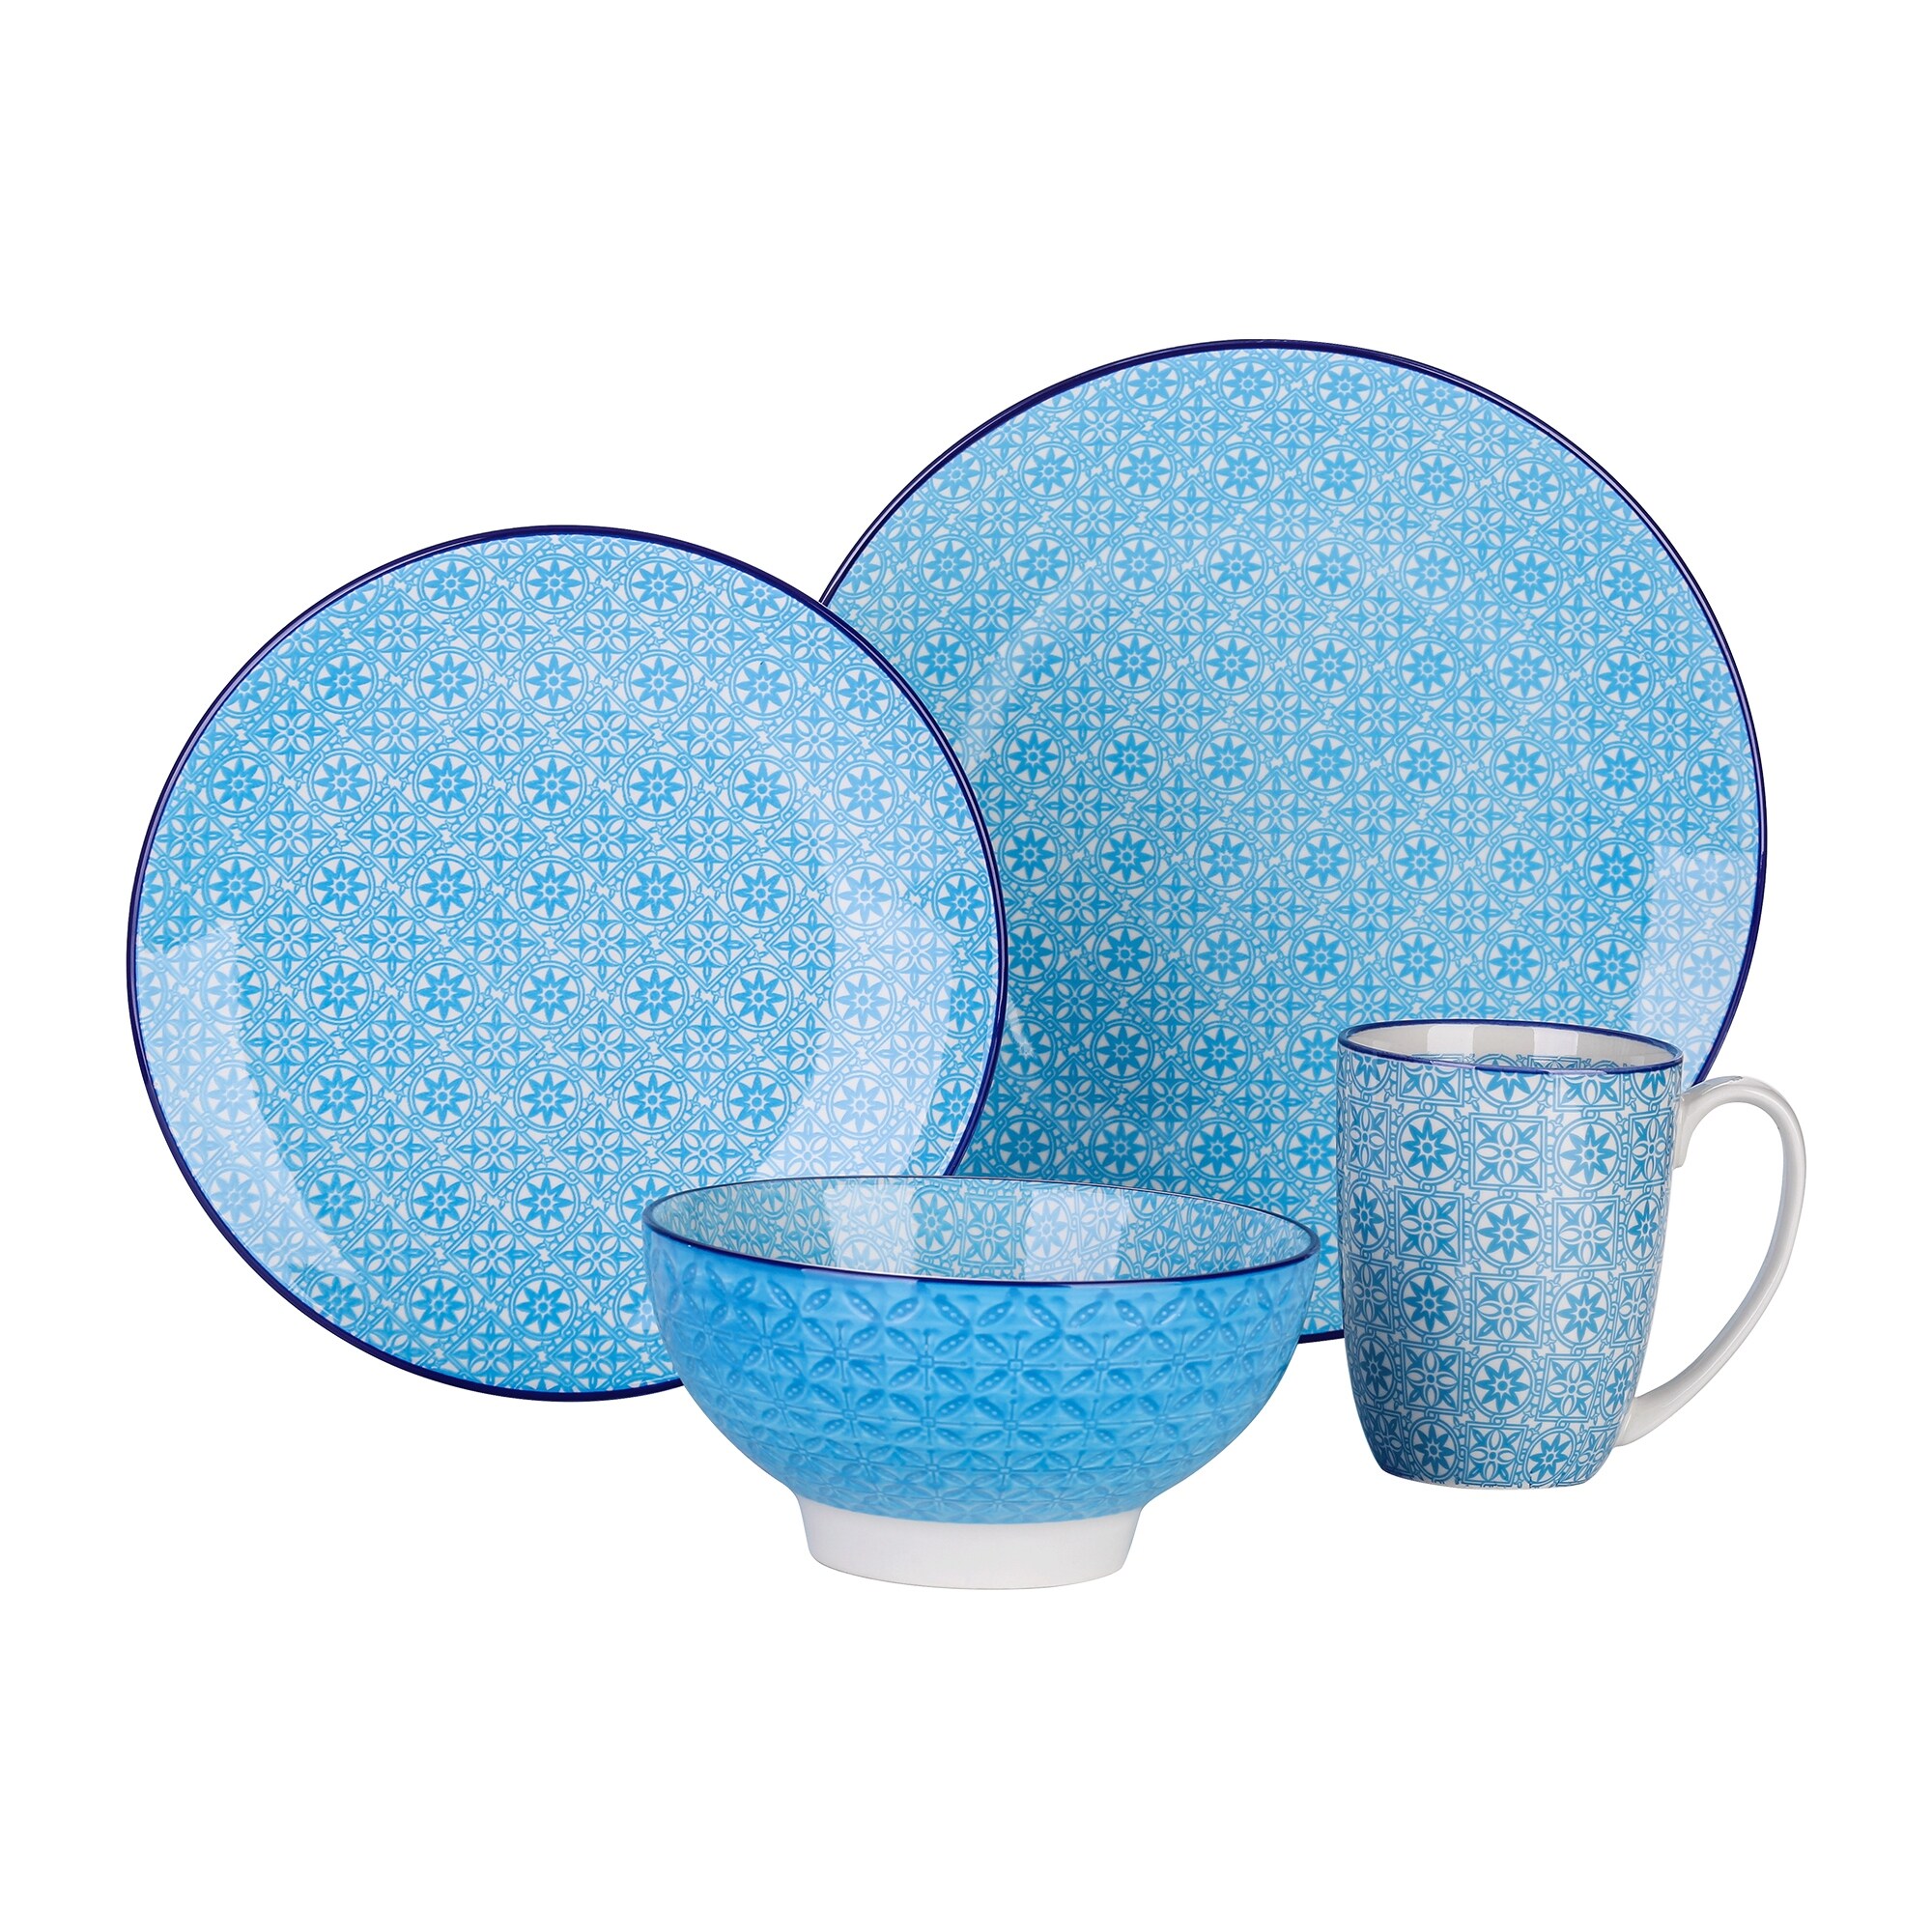 https://ak1.ostkcdn.com/images/products/is/images/direct/2340932a2a39a7a0651abc74a410082039ae0851/4-Piece-Light-Blue-Porcelain-Dinnerware-Set-Plates-and-Bowls-Mugs.jpg